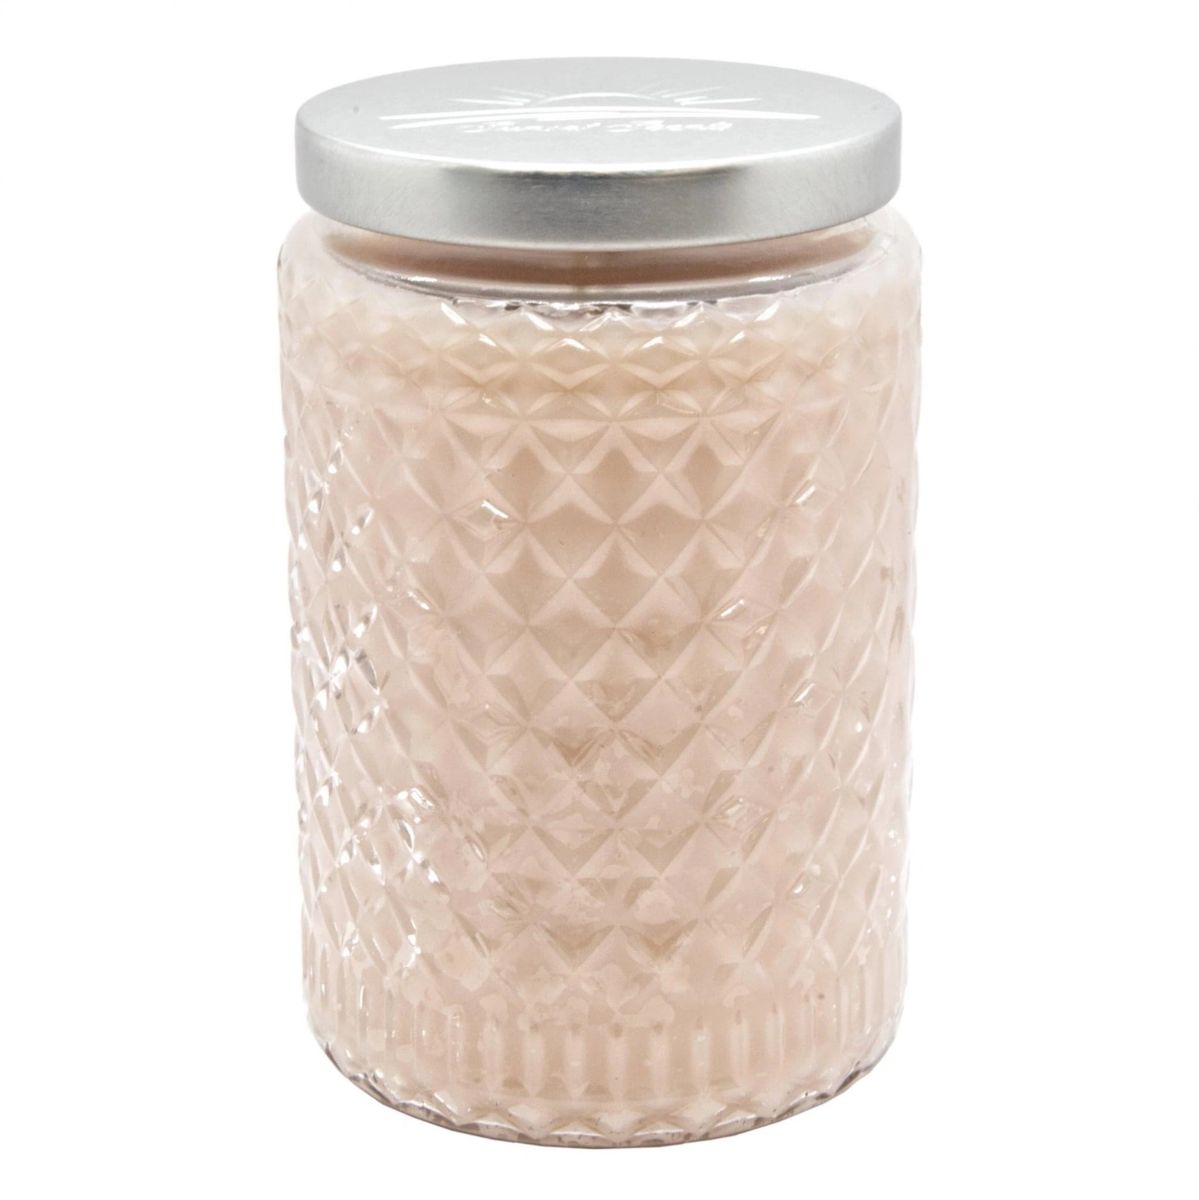 Cozy Cabin Candles | Woodsy notes of Cedar & Geranium | Compare to Gold  Canyon Cozy